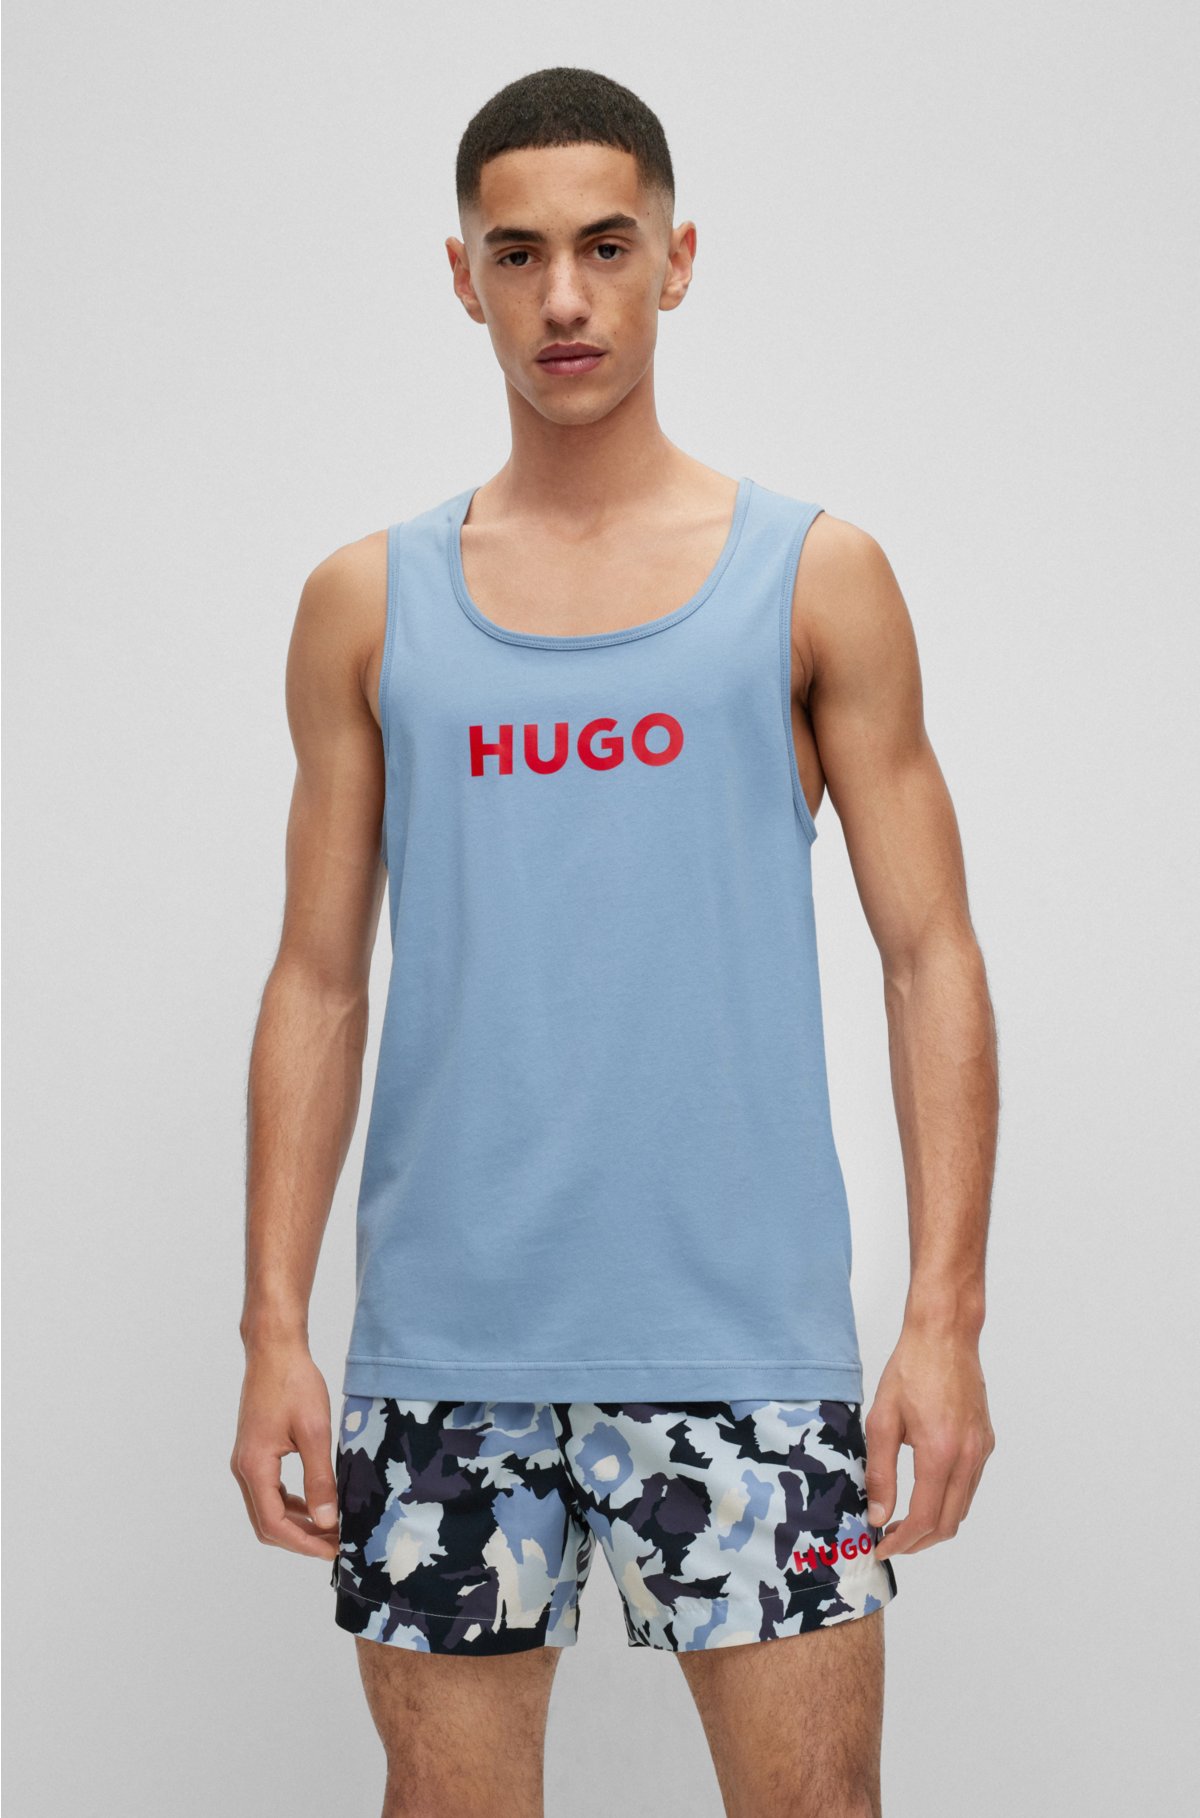 HUGO logo - top tank Cotton red with